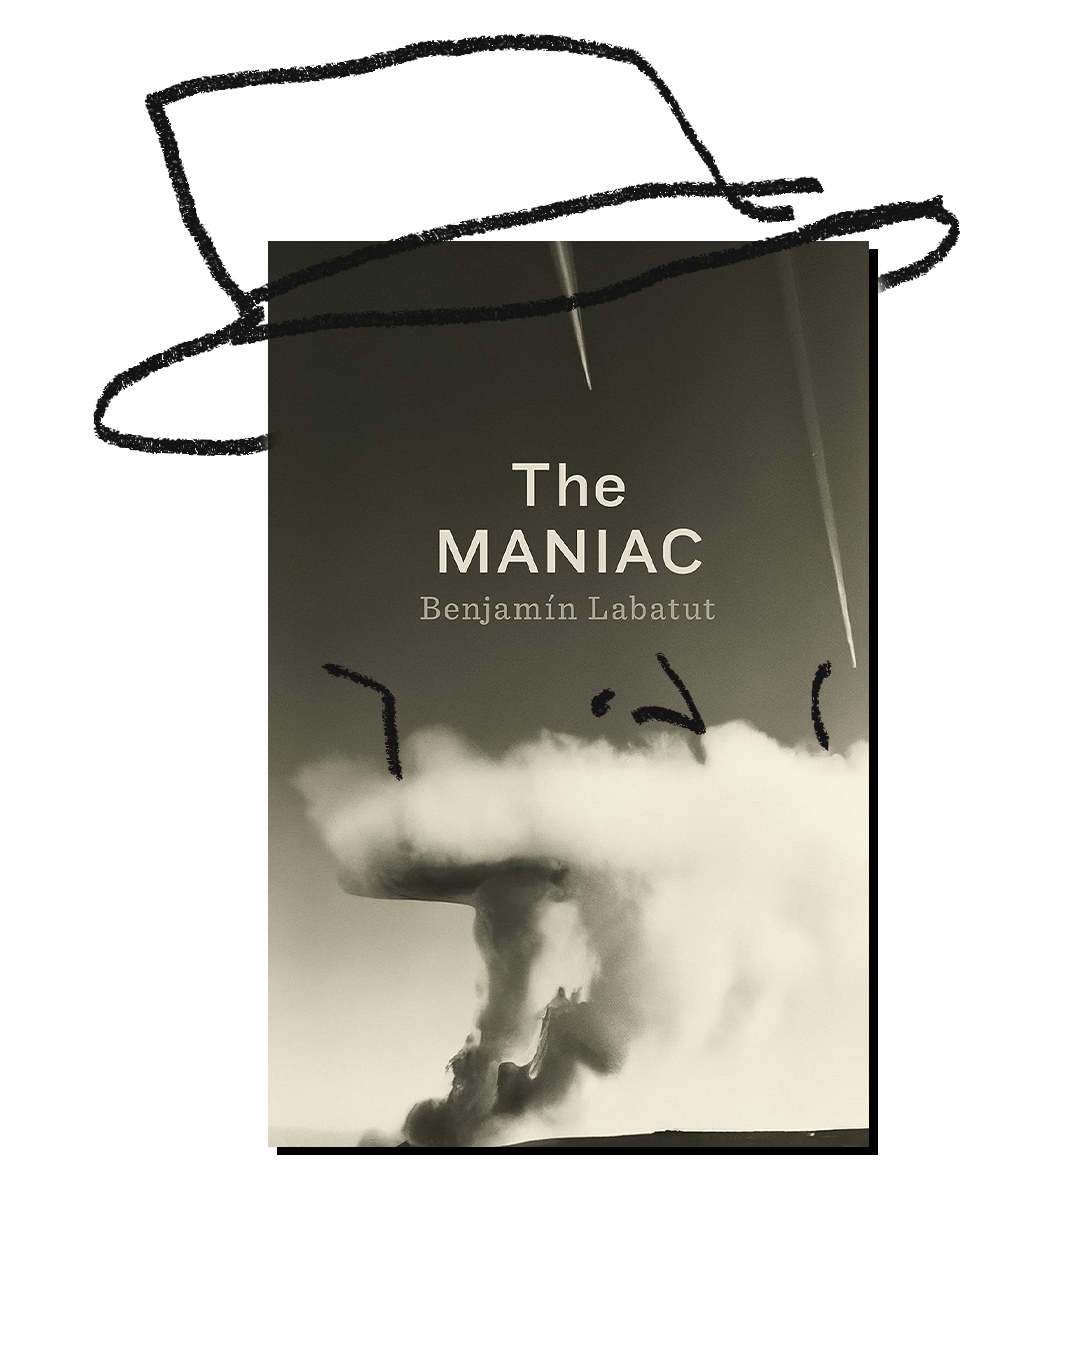 True Enough: “The MANIAC” and “Oppenheimer” — Cleveland Review of Books